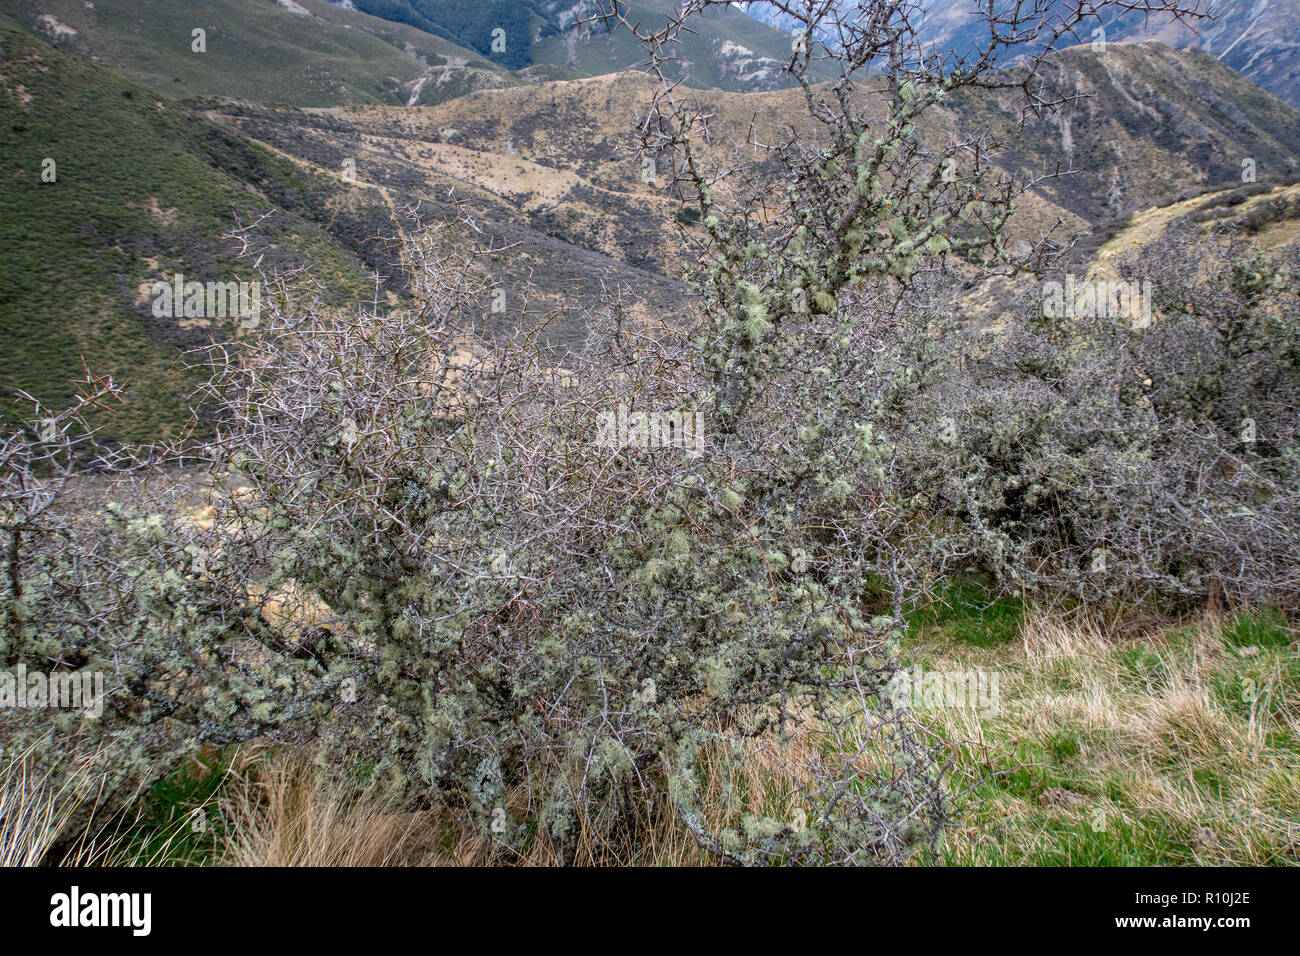 Matagouri growing near tussocks in the high country of New Zealand Stock Photo